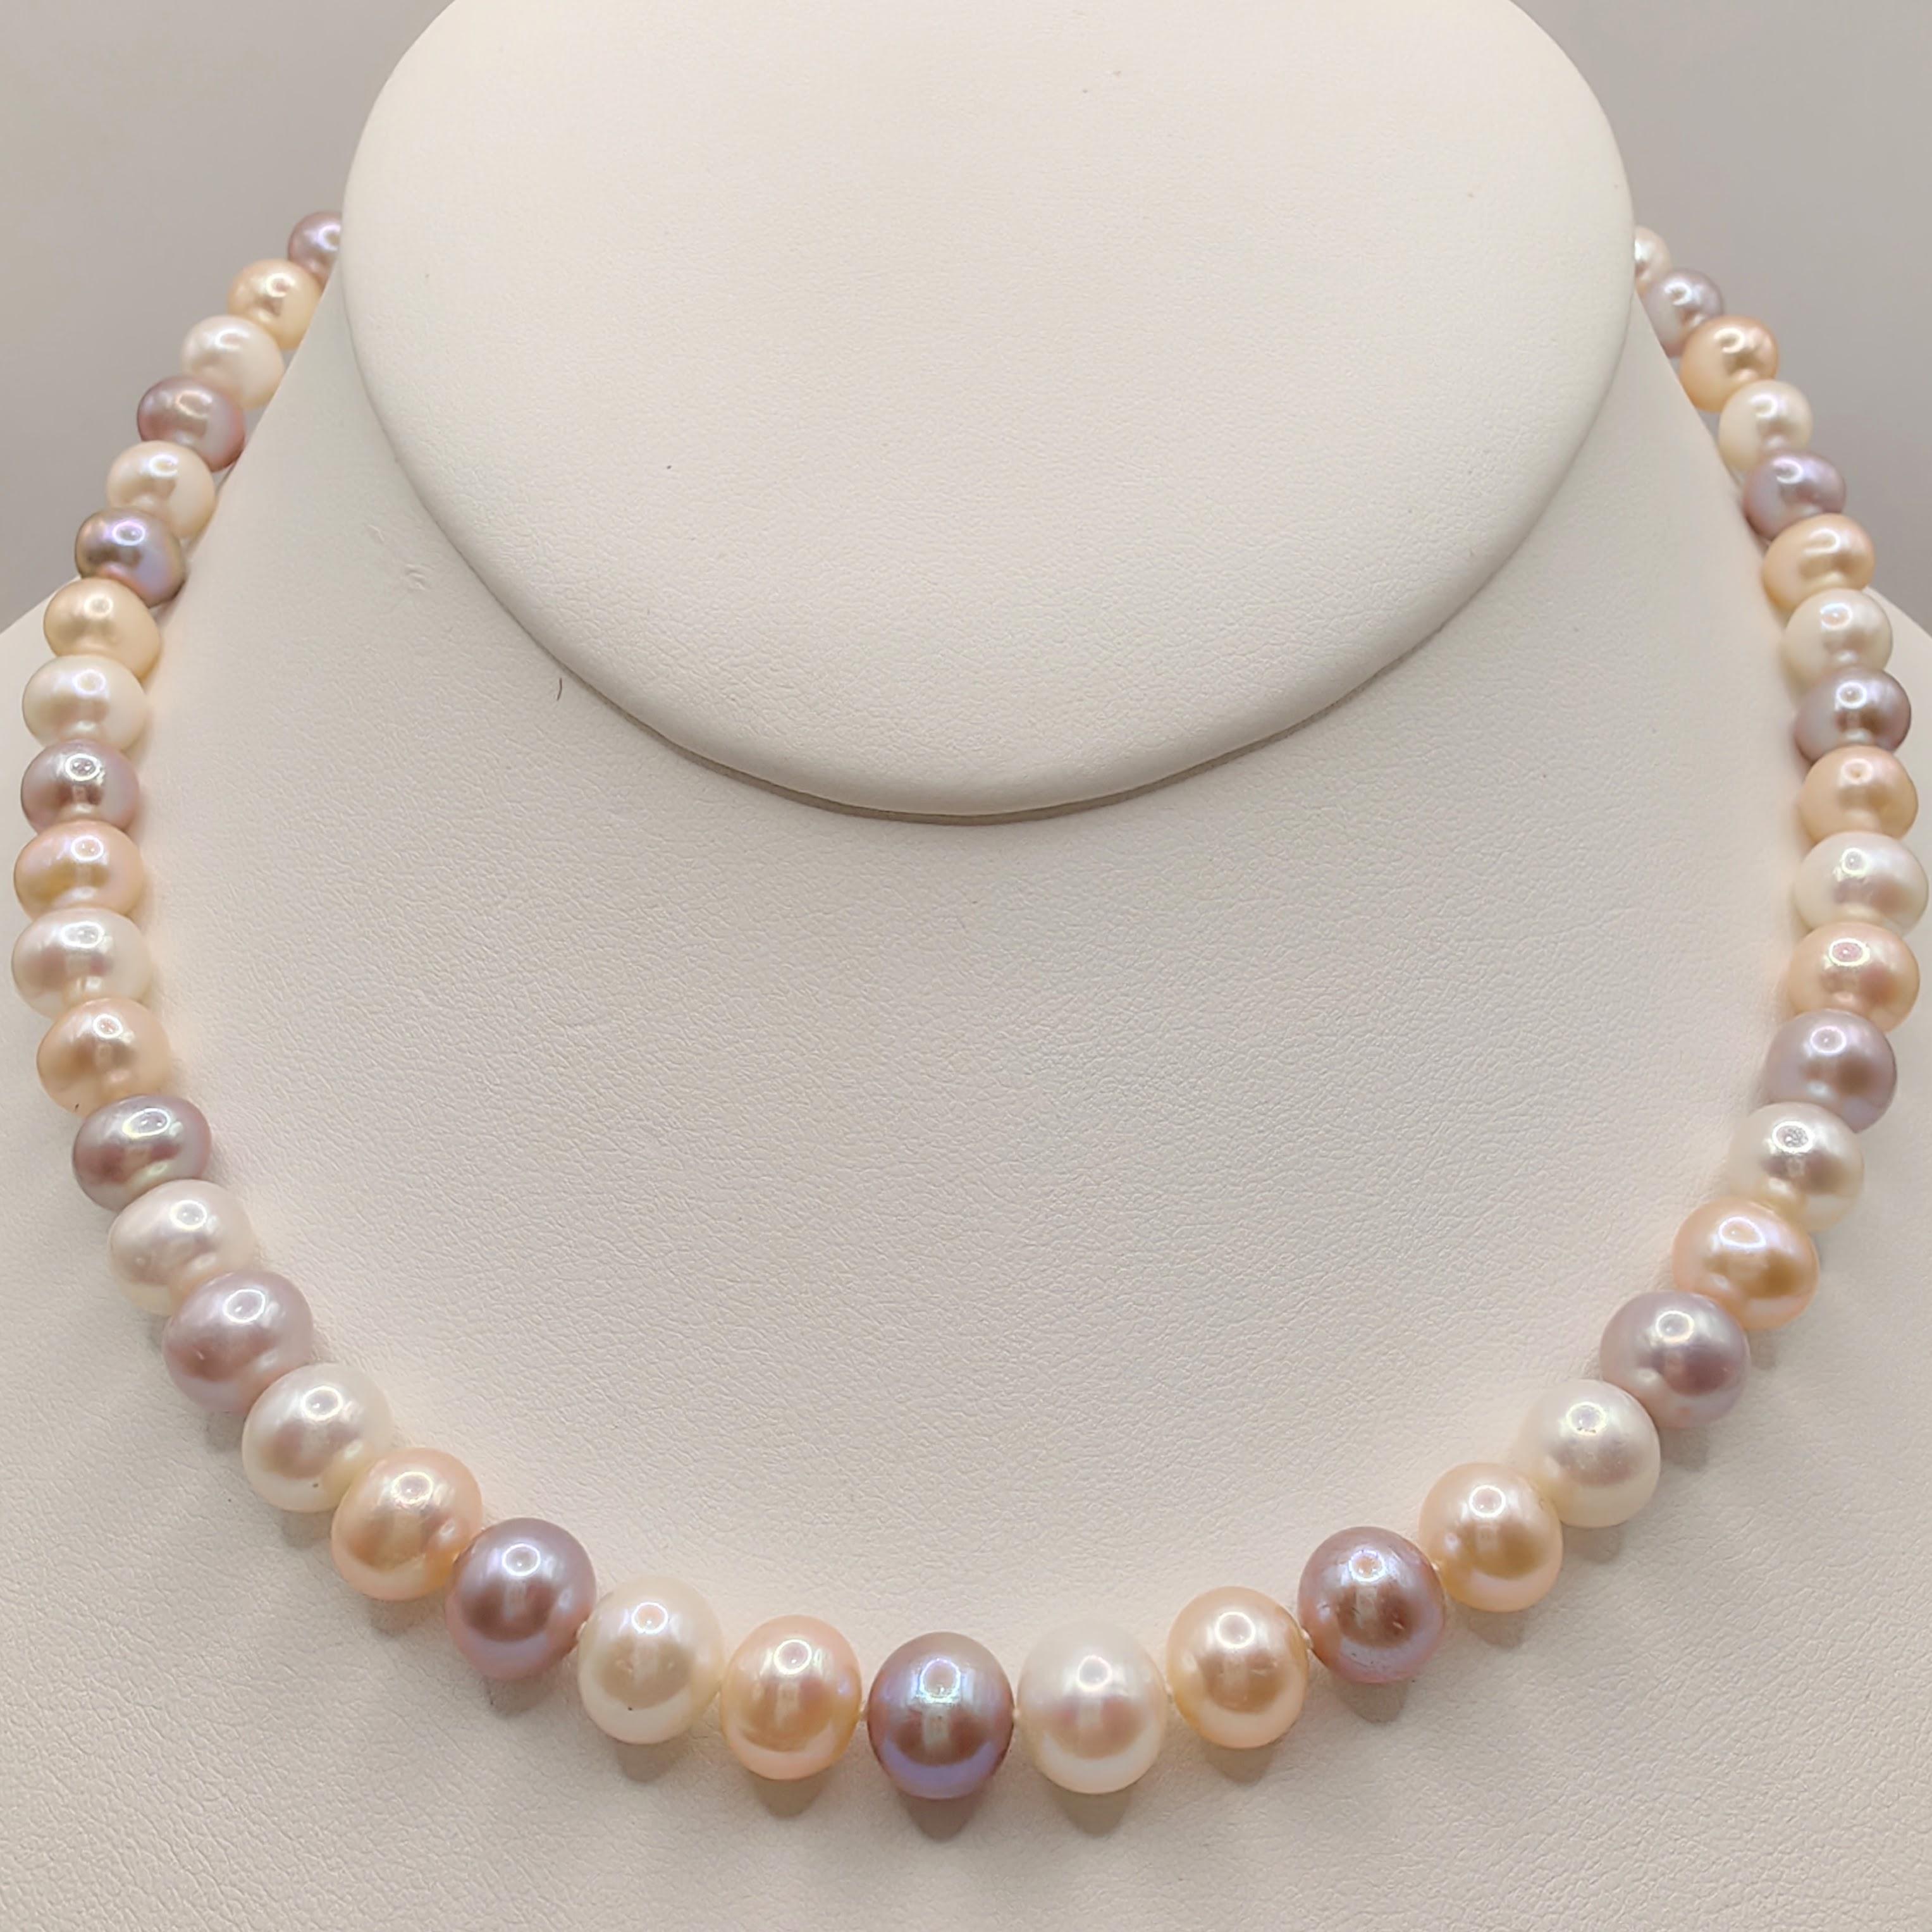 7-8mm Candy Pastel Multi-Color Round Pearl Necklace with 18K Gold Clasp For Sale 1